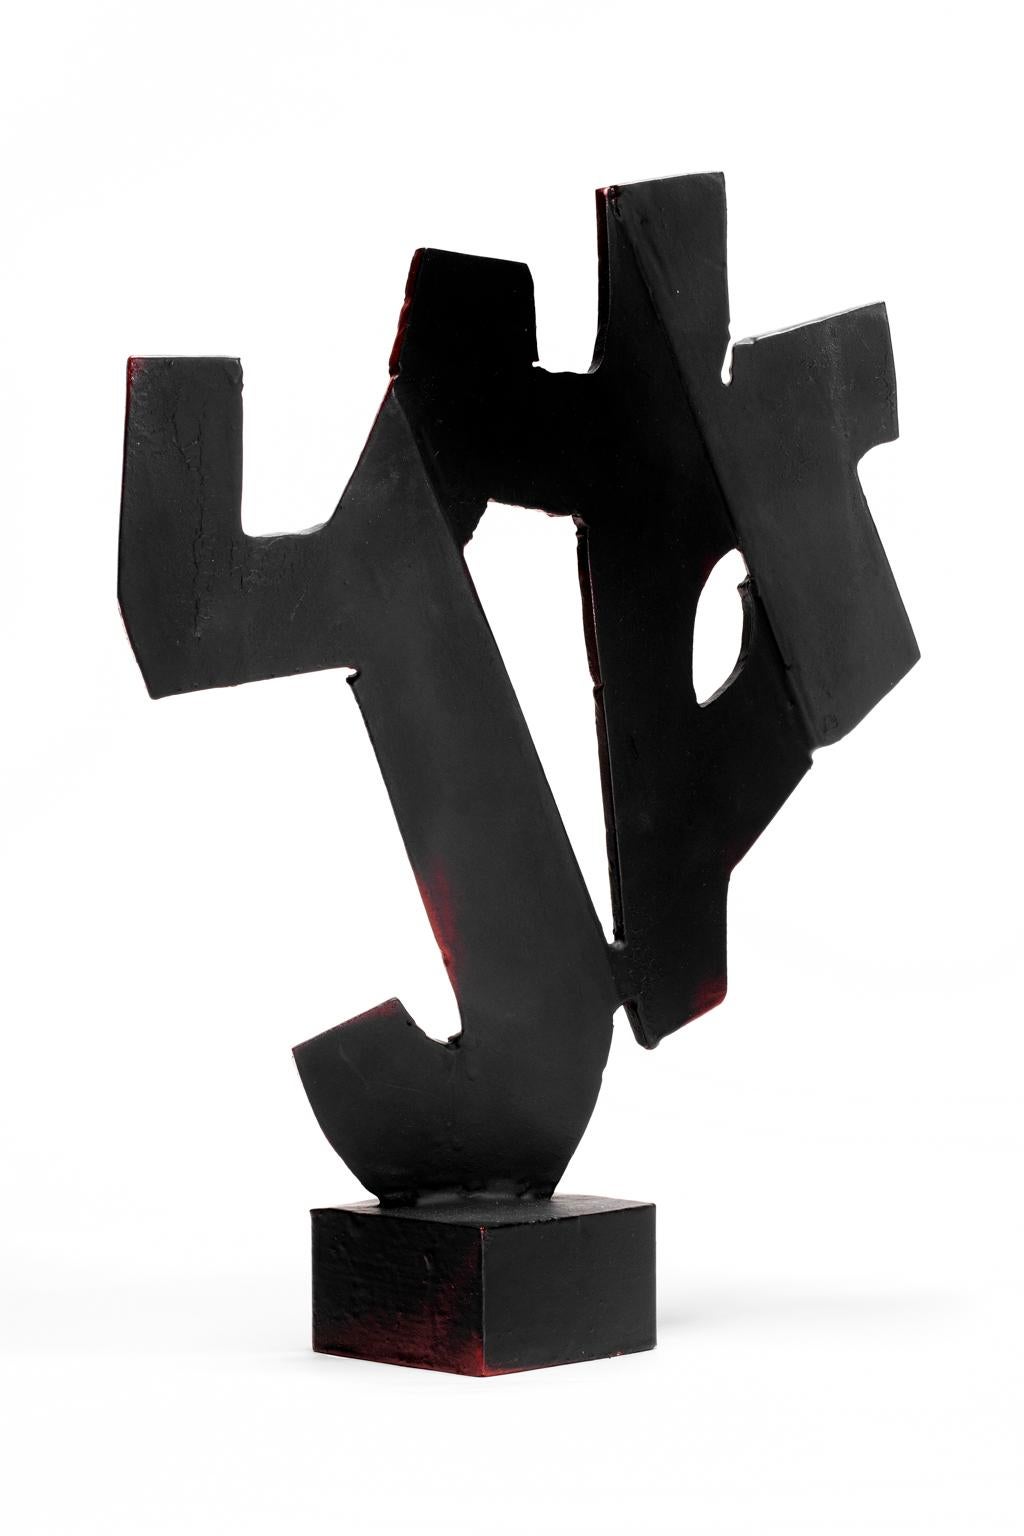 American Tony Rosenthal Abstract Sculpture Blackened Steel Red Blushes For Sale